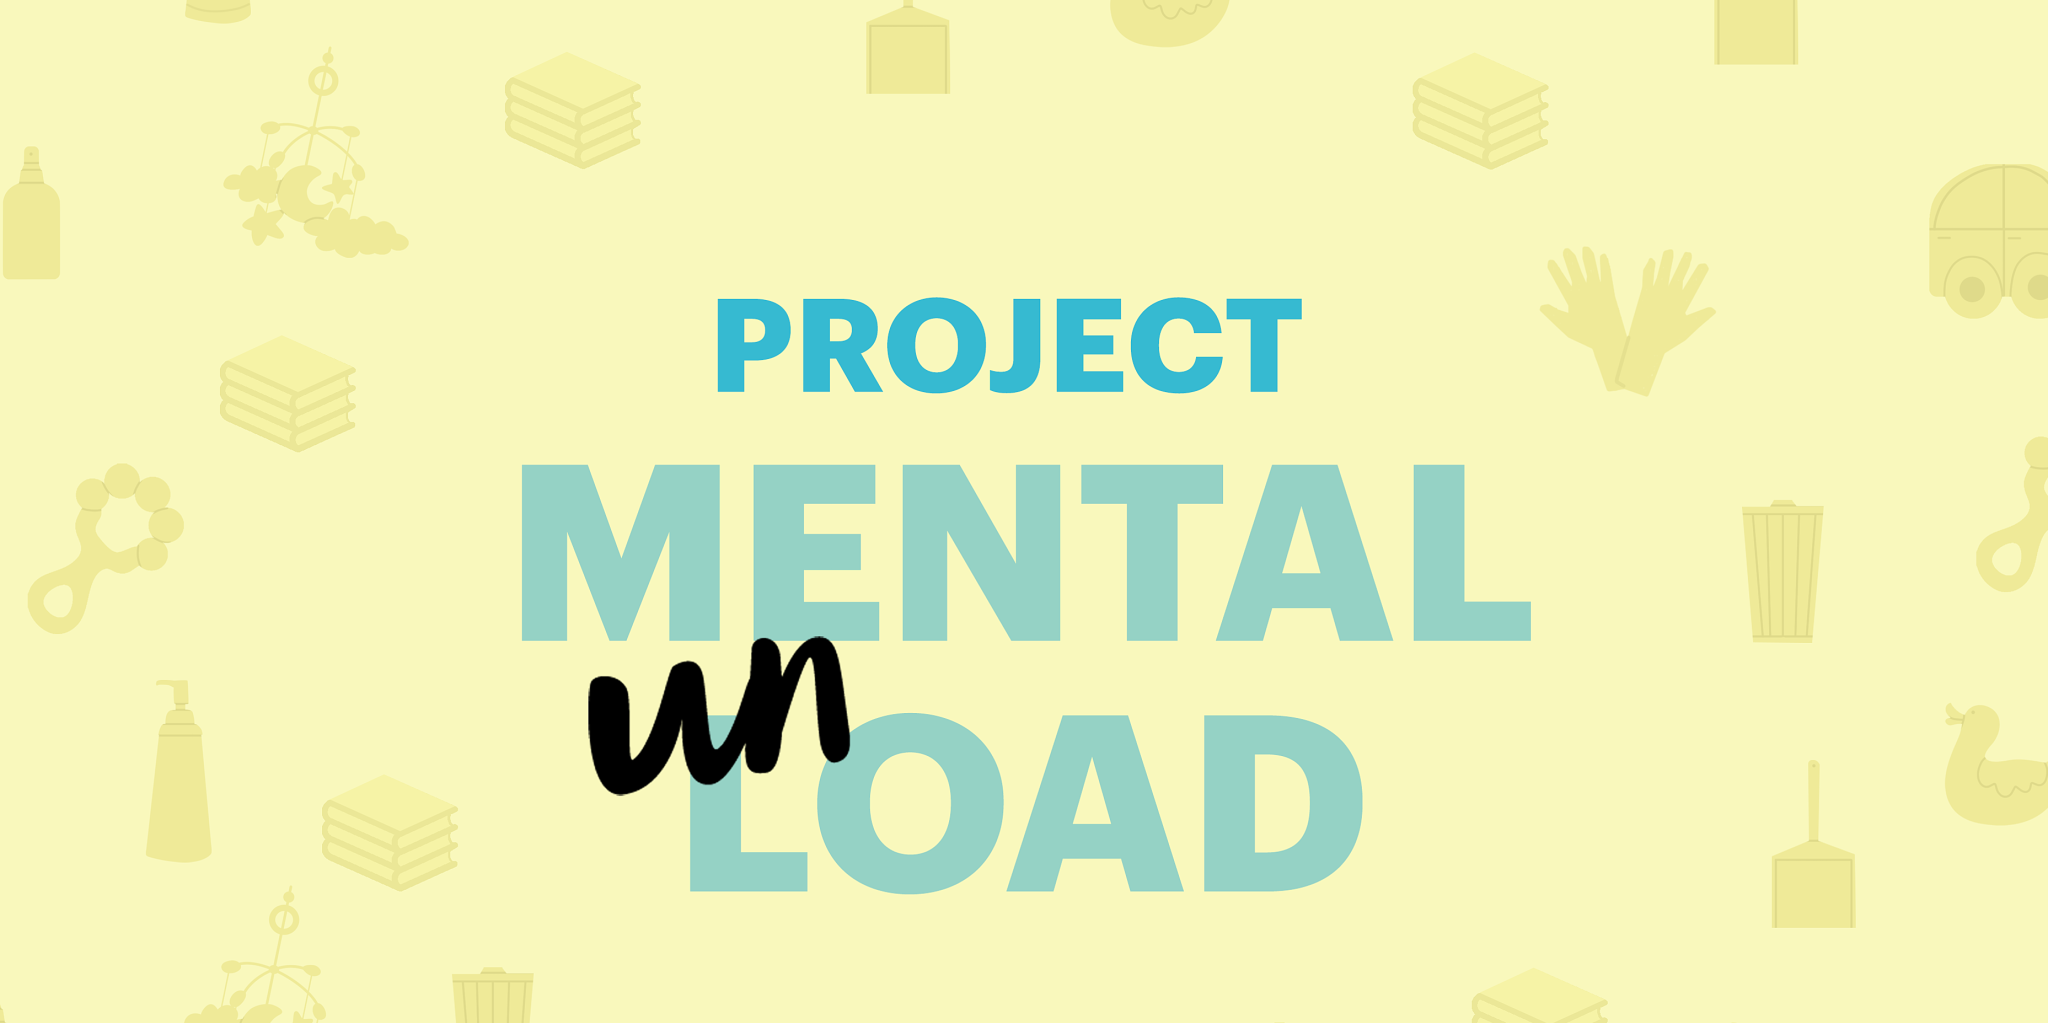 What Is the Mental Load and Why Do Moms Often Carry It More?